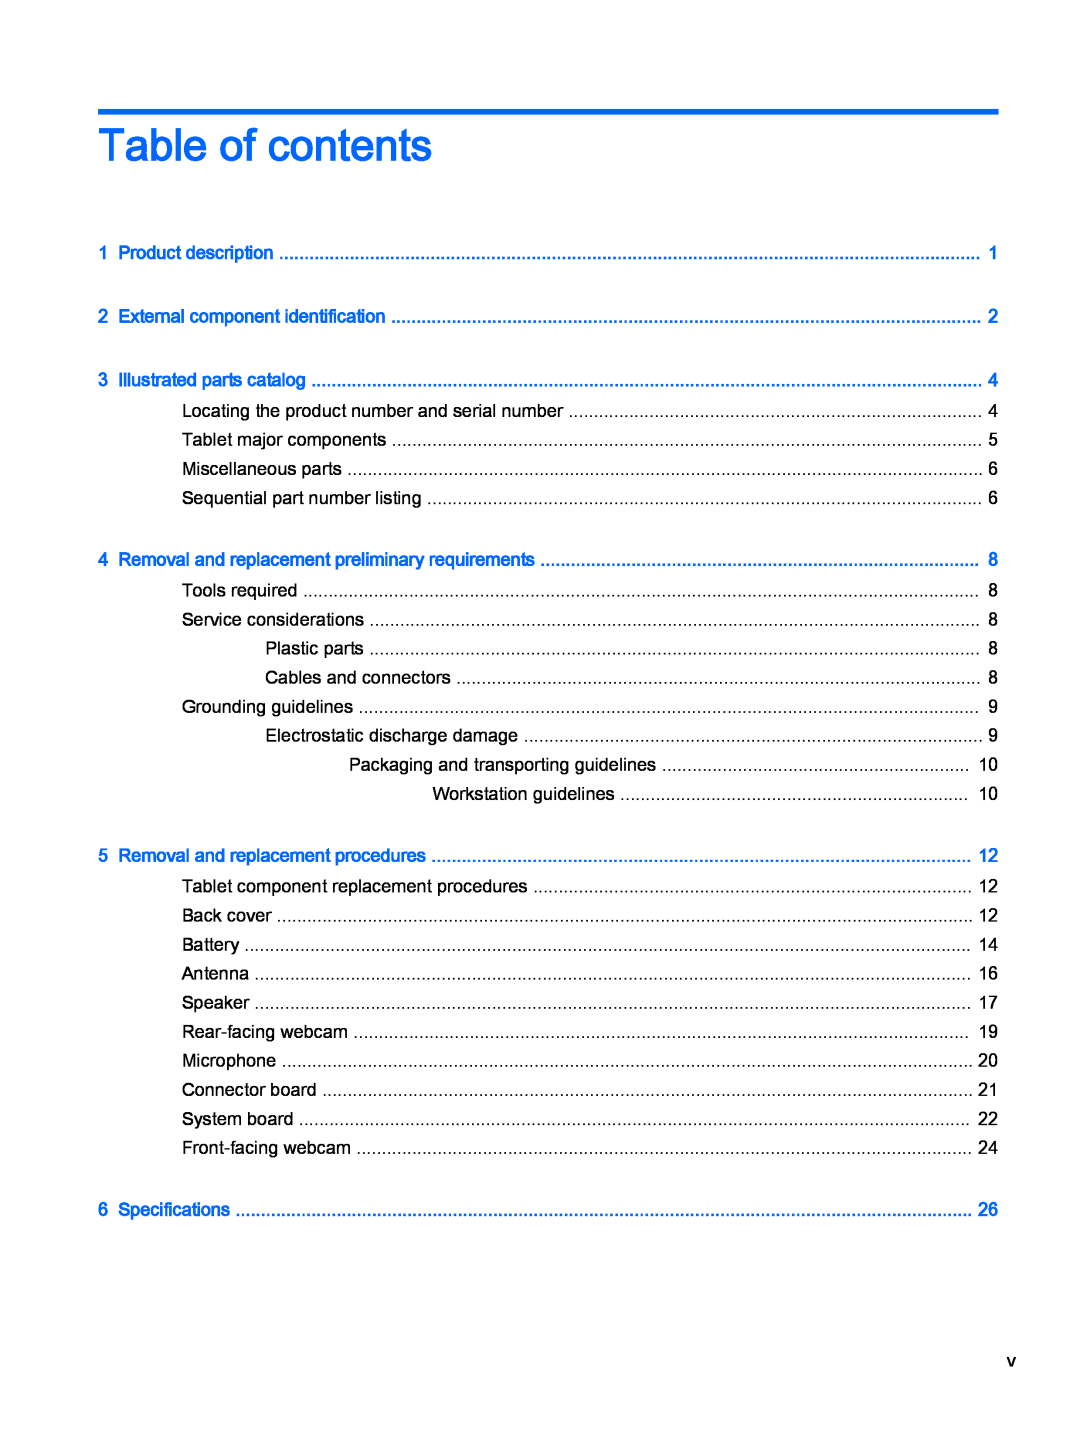 HP 7 Plus G2 - 1331 manual Table of contents 